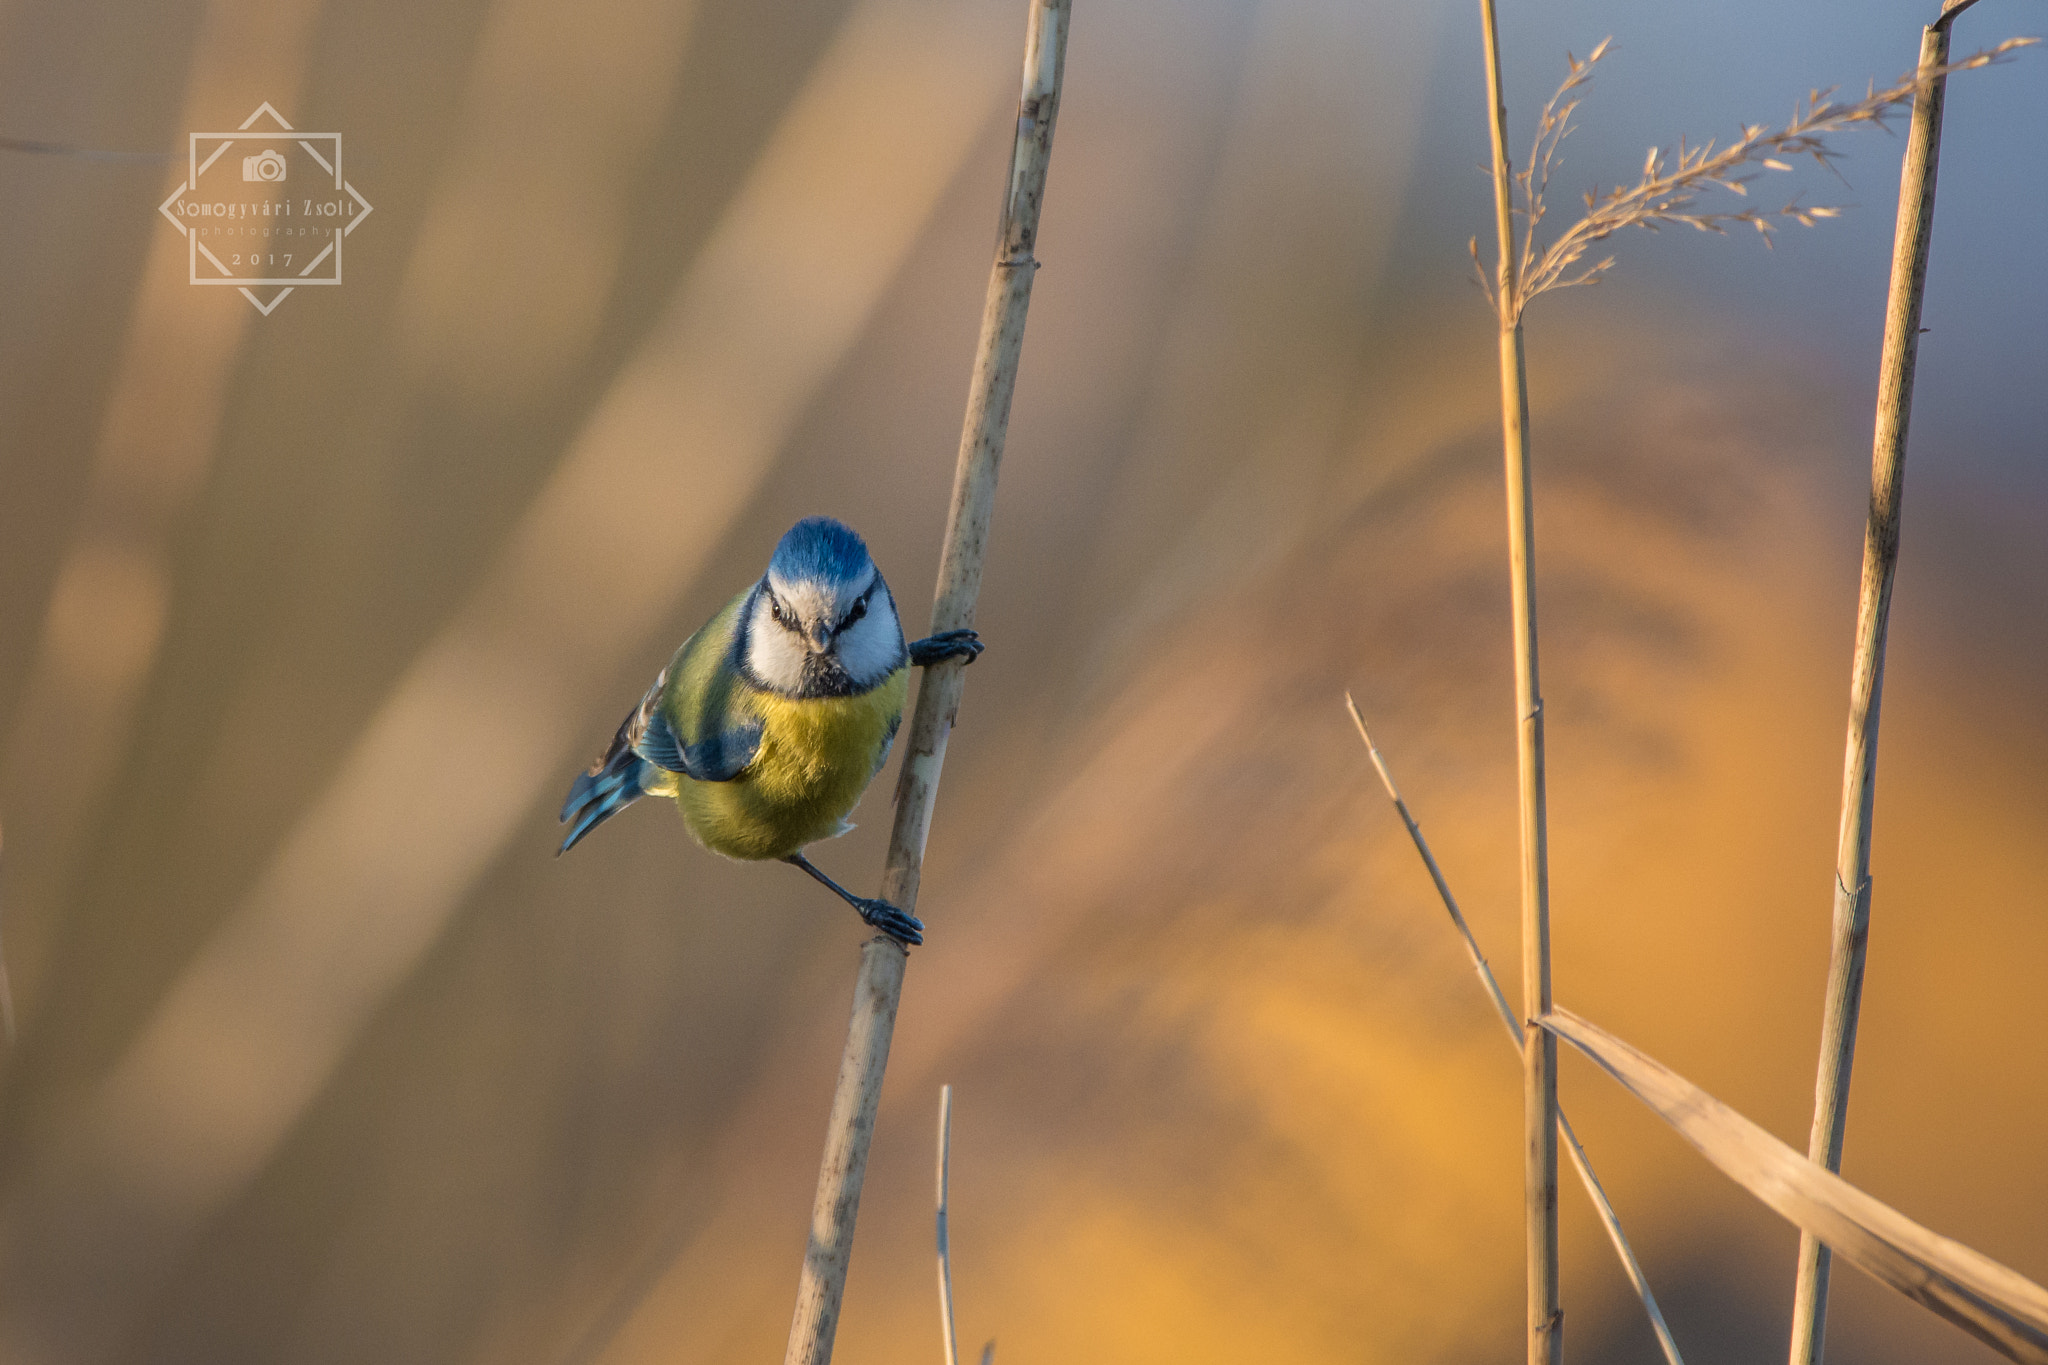 Nikon D7100 + Sigma 150-600mm F5-6.3 DG OS HSM | C sample photo. "is anyone there?" | blue tit. photography